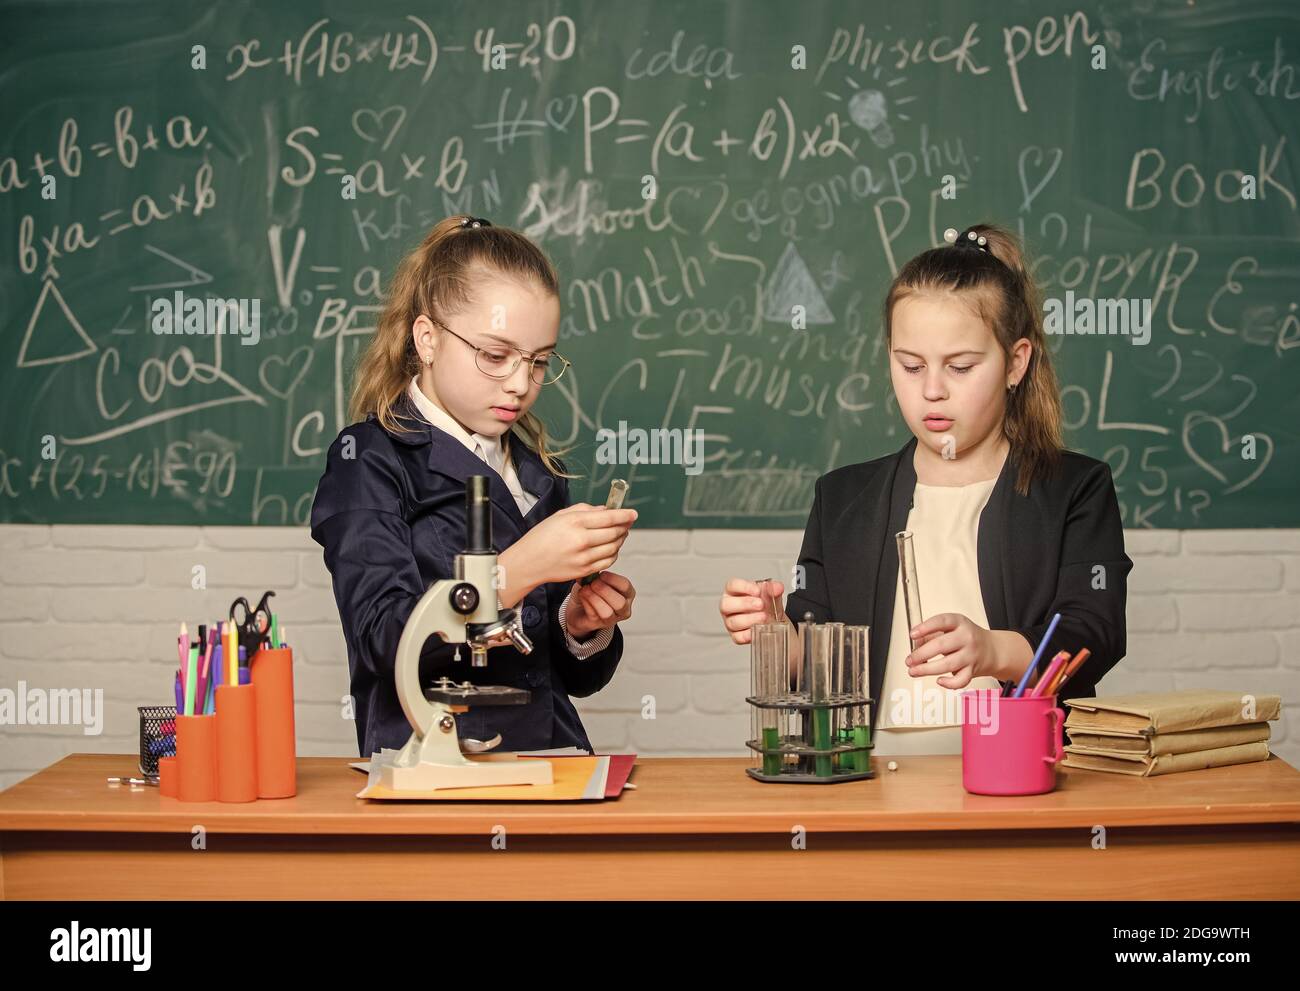 Scientific researches. Little scientist work with microscope. Little girls in school lab. Formal school education. Biology school lesson. Chemistry research. science experiments in laboratory. Stock Photo